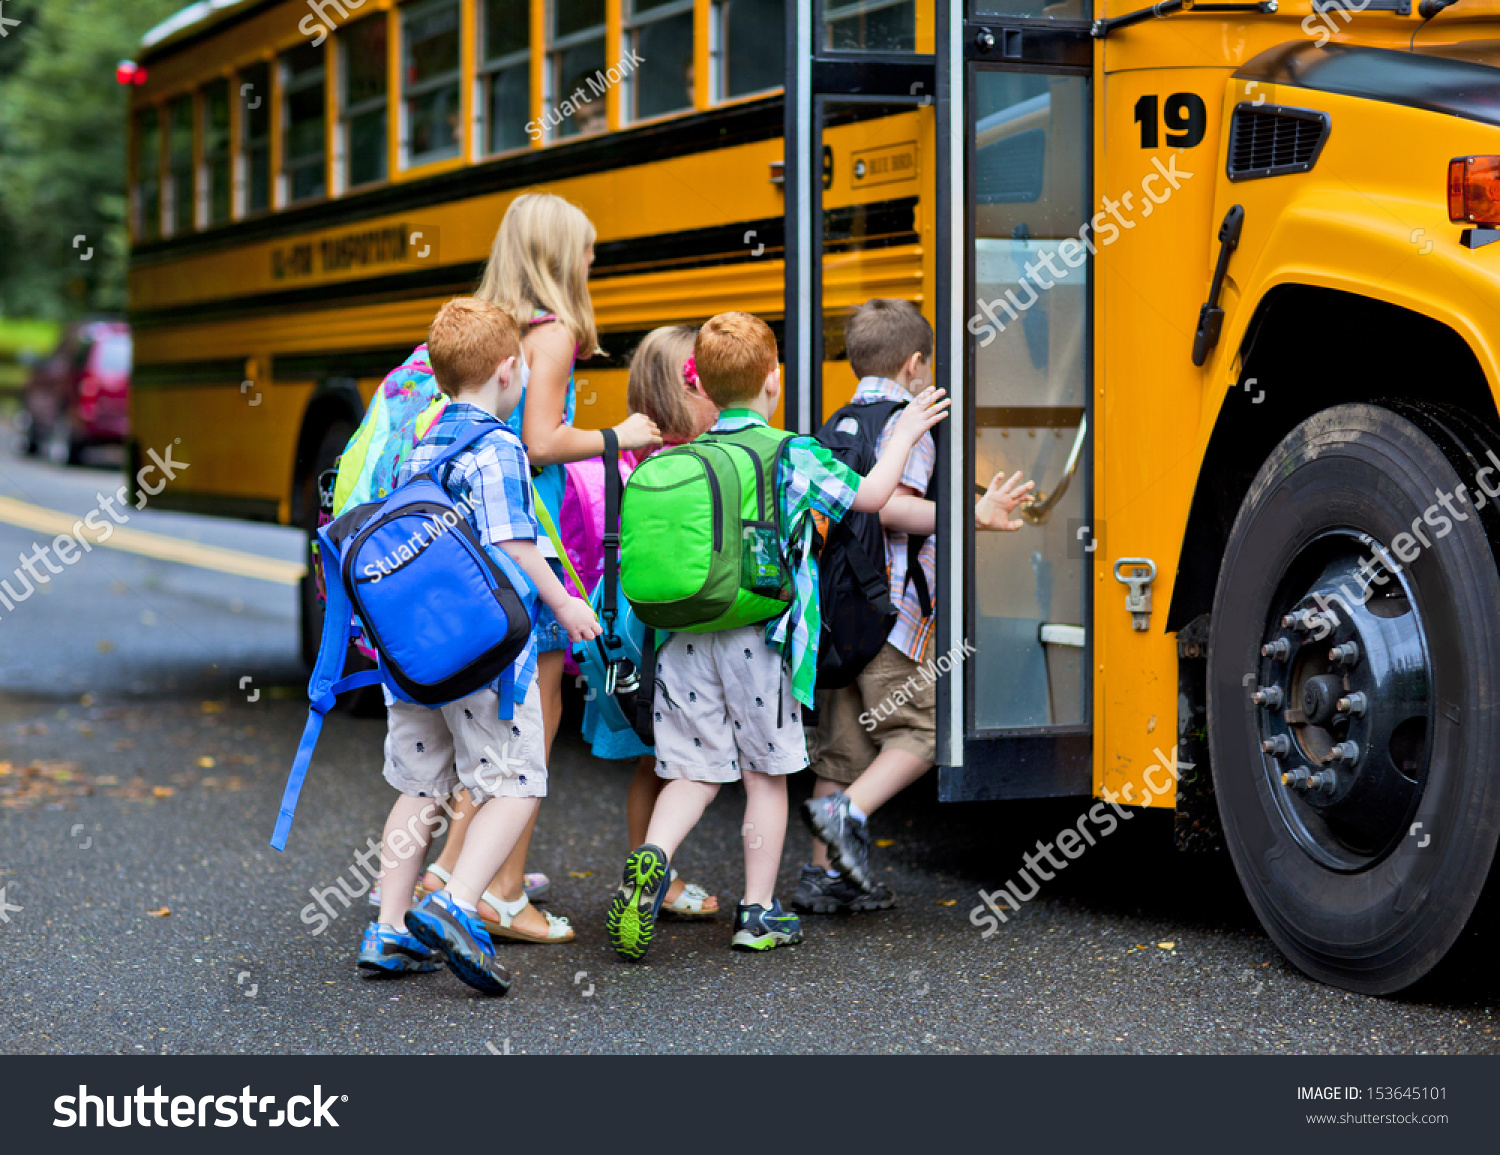 A group of young children getting on the schoolbus #153645101